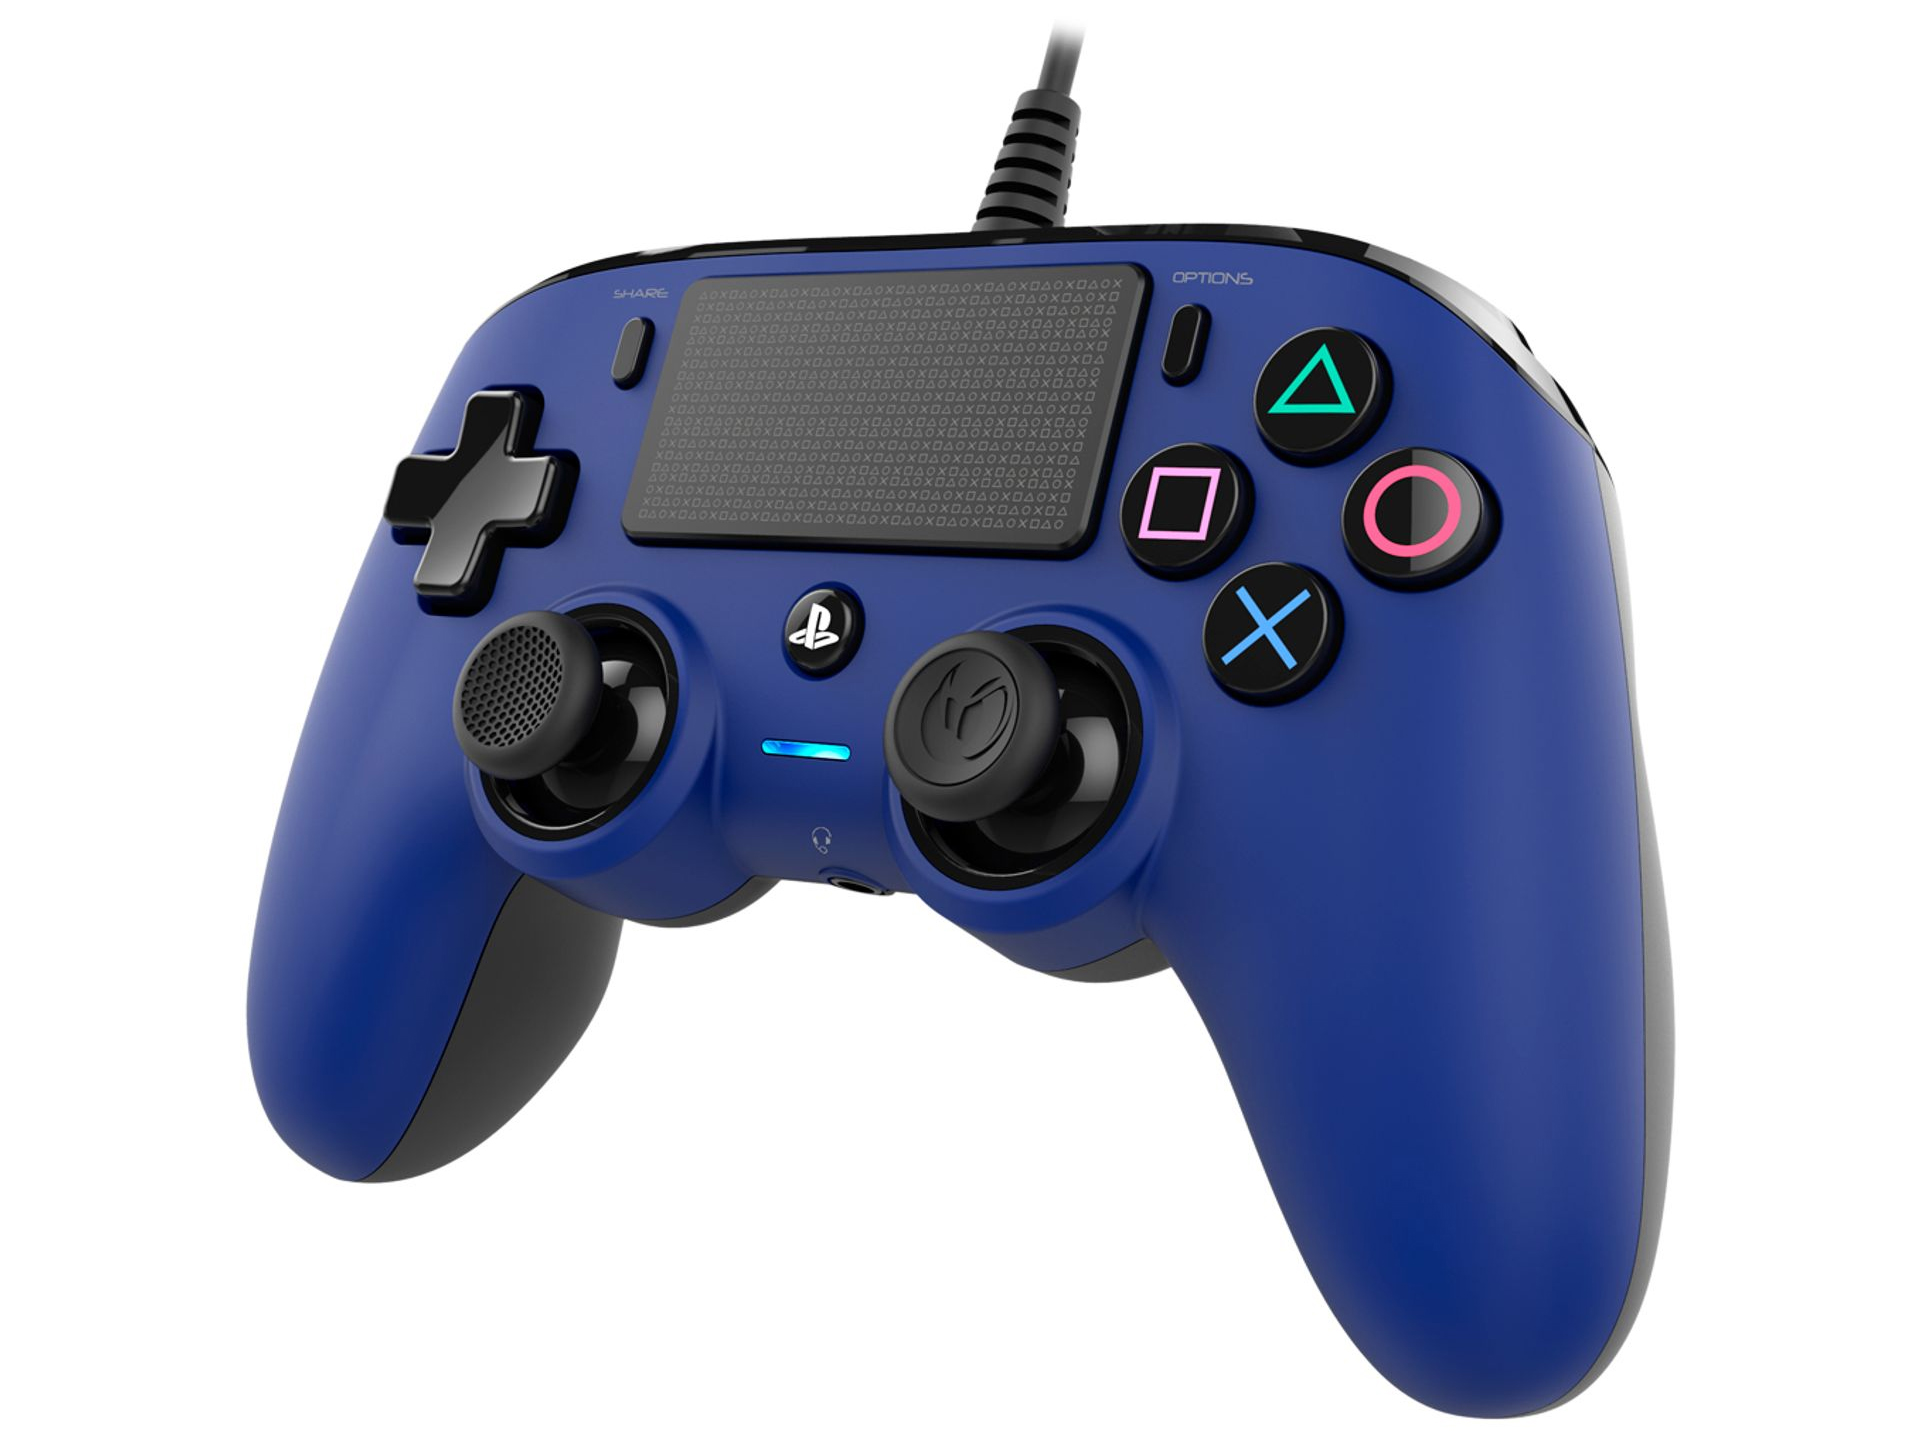 Ds4 джойстик. Джойстик ps4 Nacon. Nacon геймпад ps4. Nacon wired Compact Controller. Hori ps4-149e.